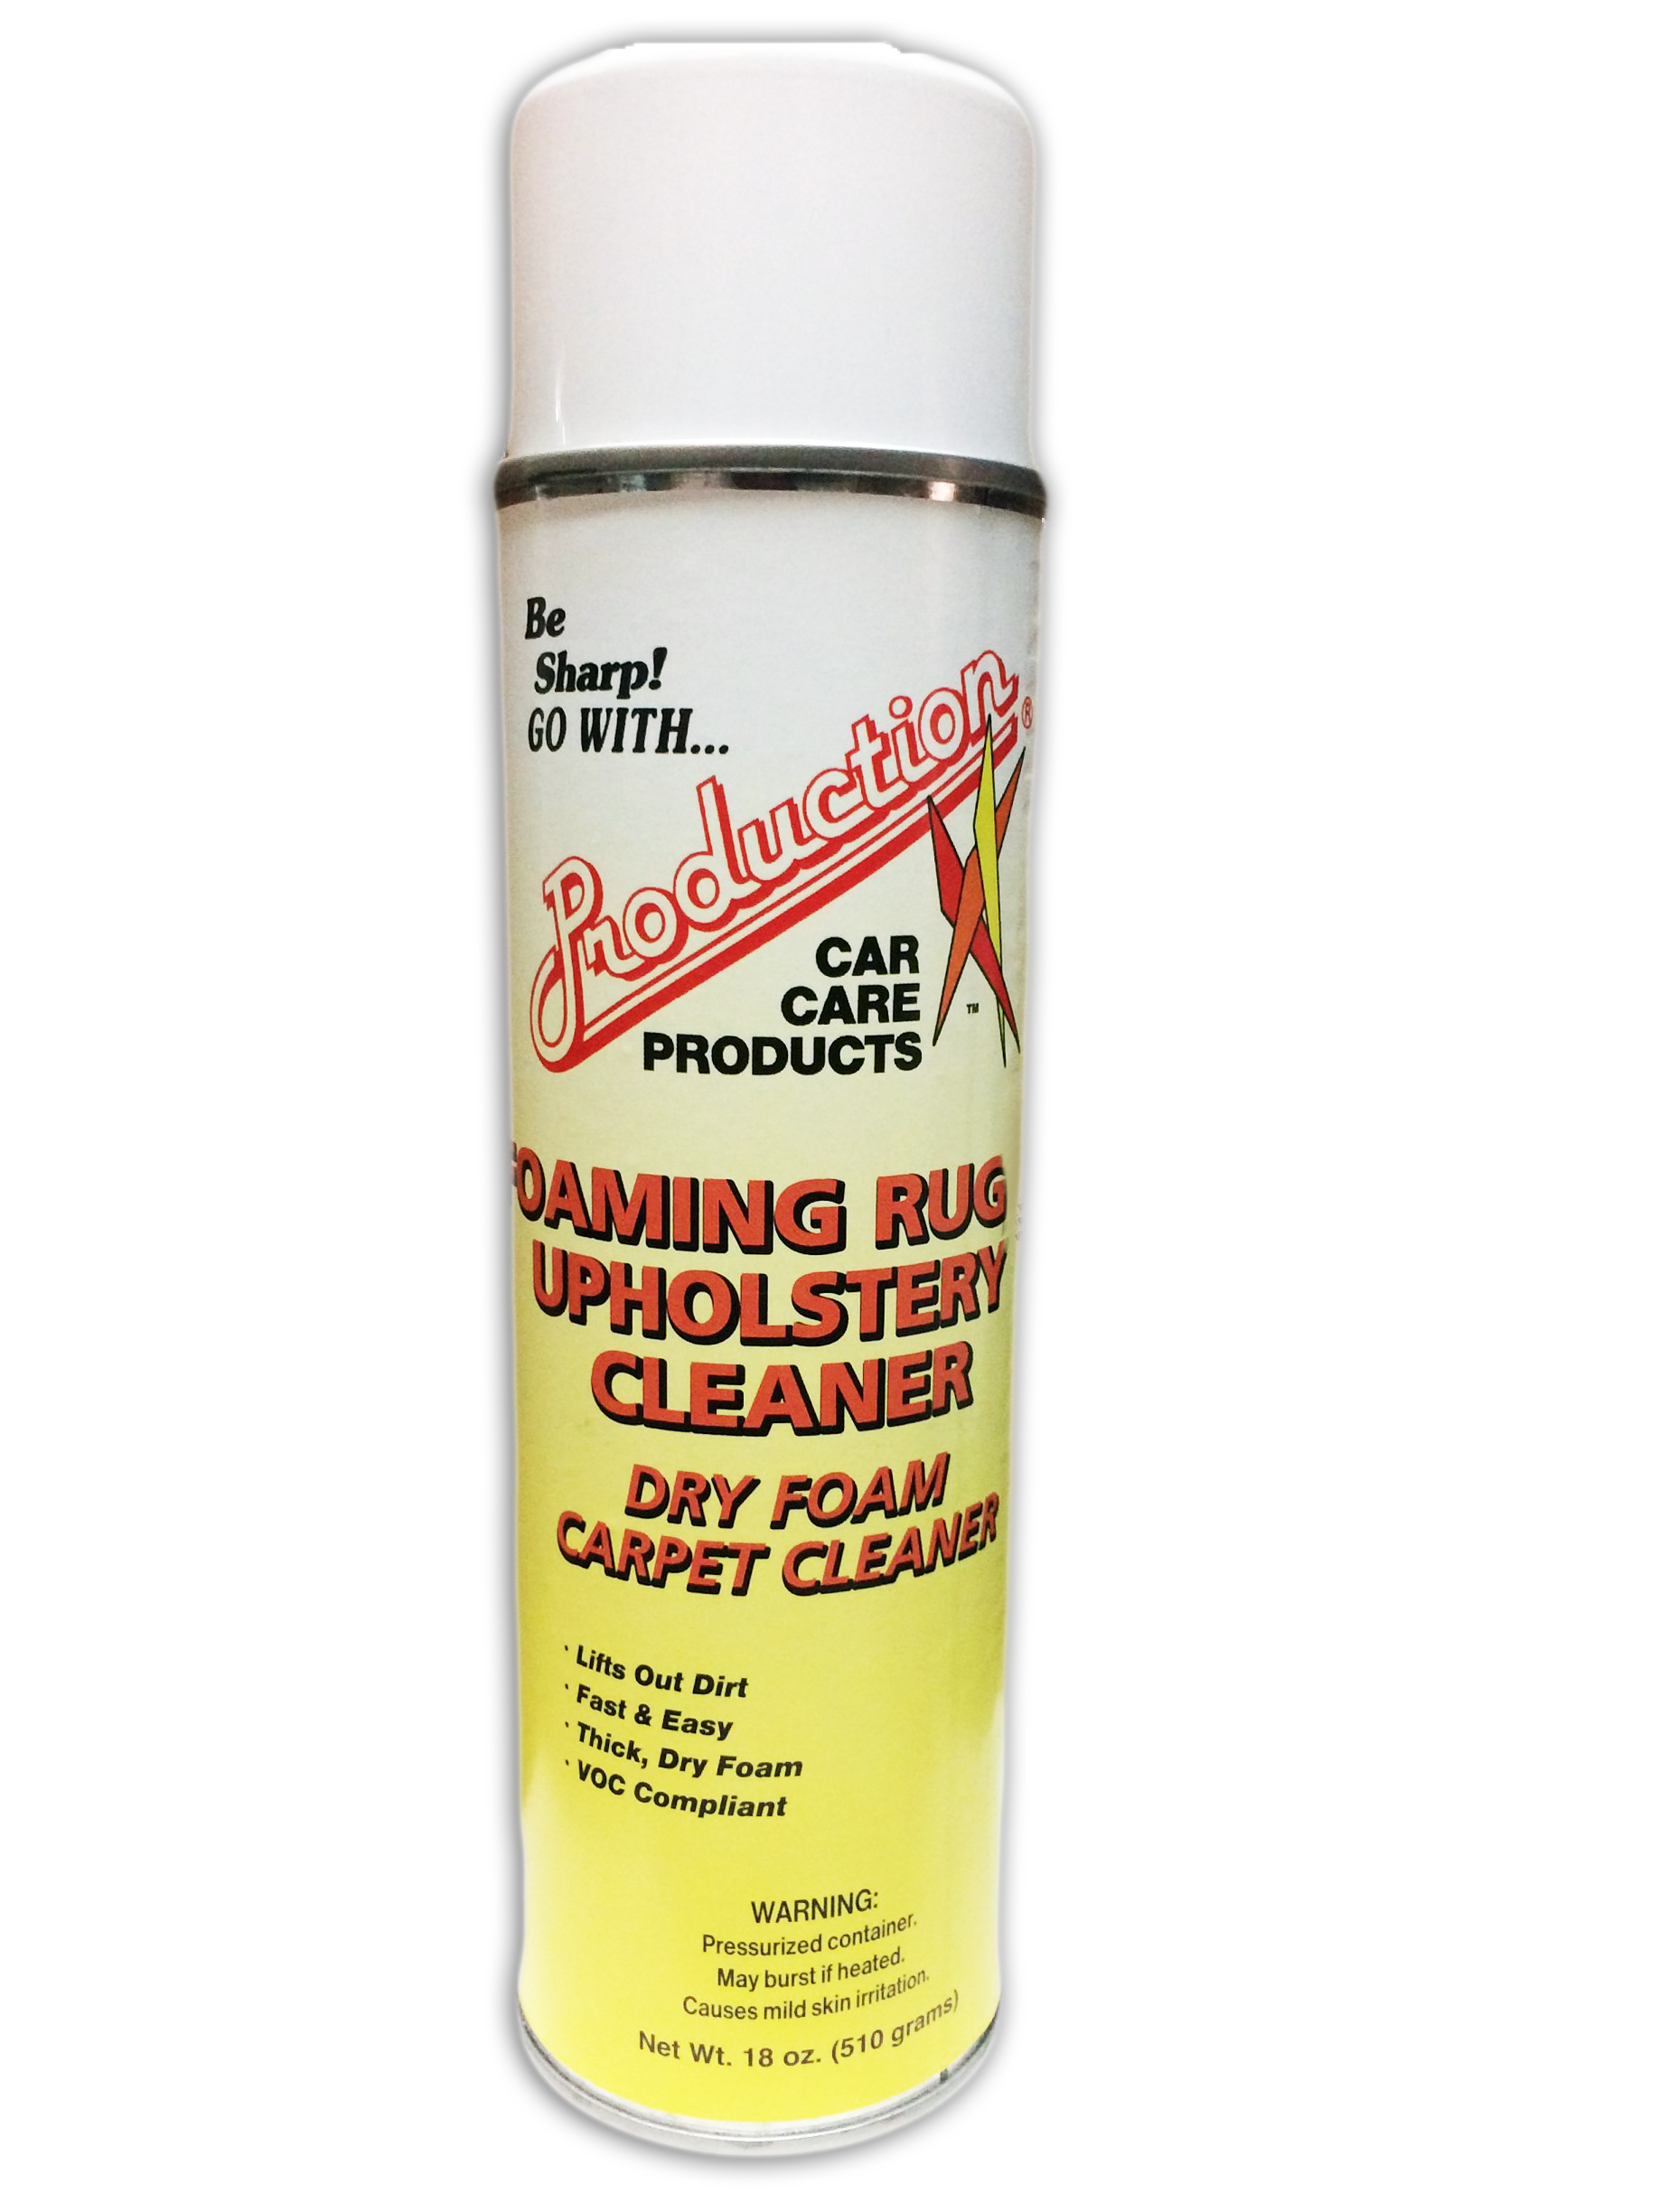 FOAMING RUG UPHOLSTERY CLEANER - WORLD'S FINEST CAR CARE PRODUCTS